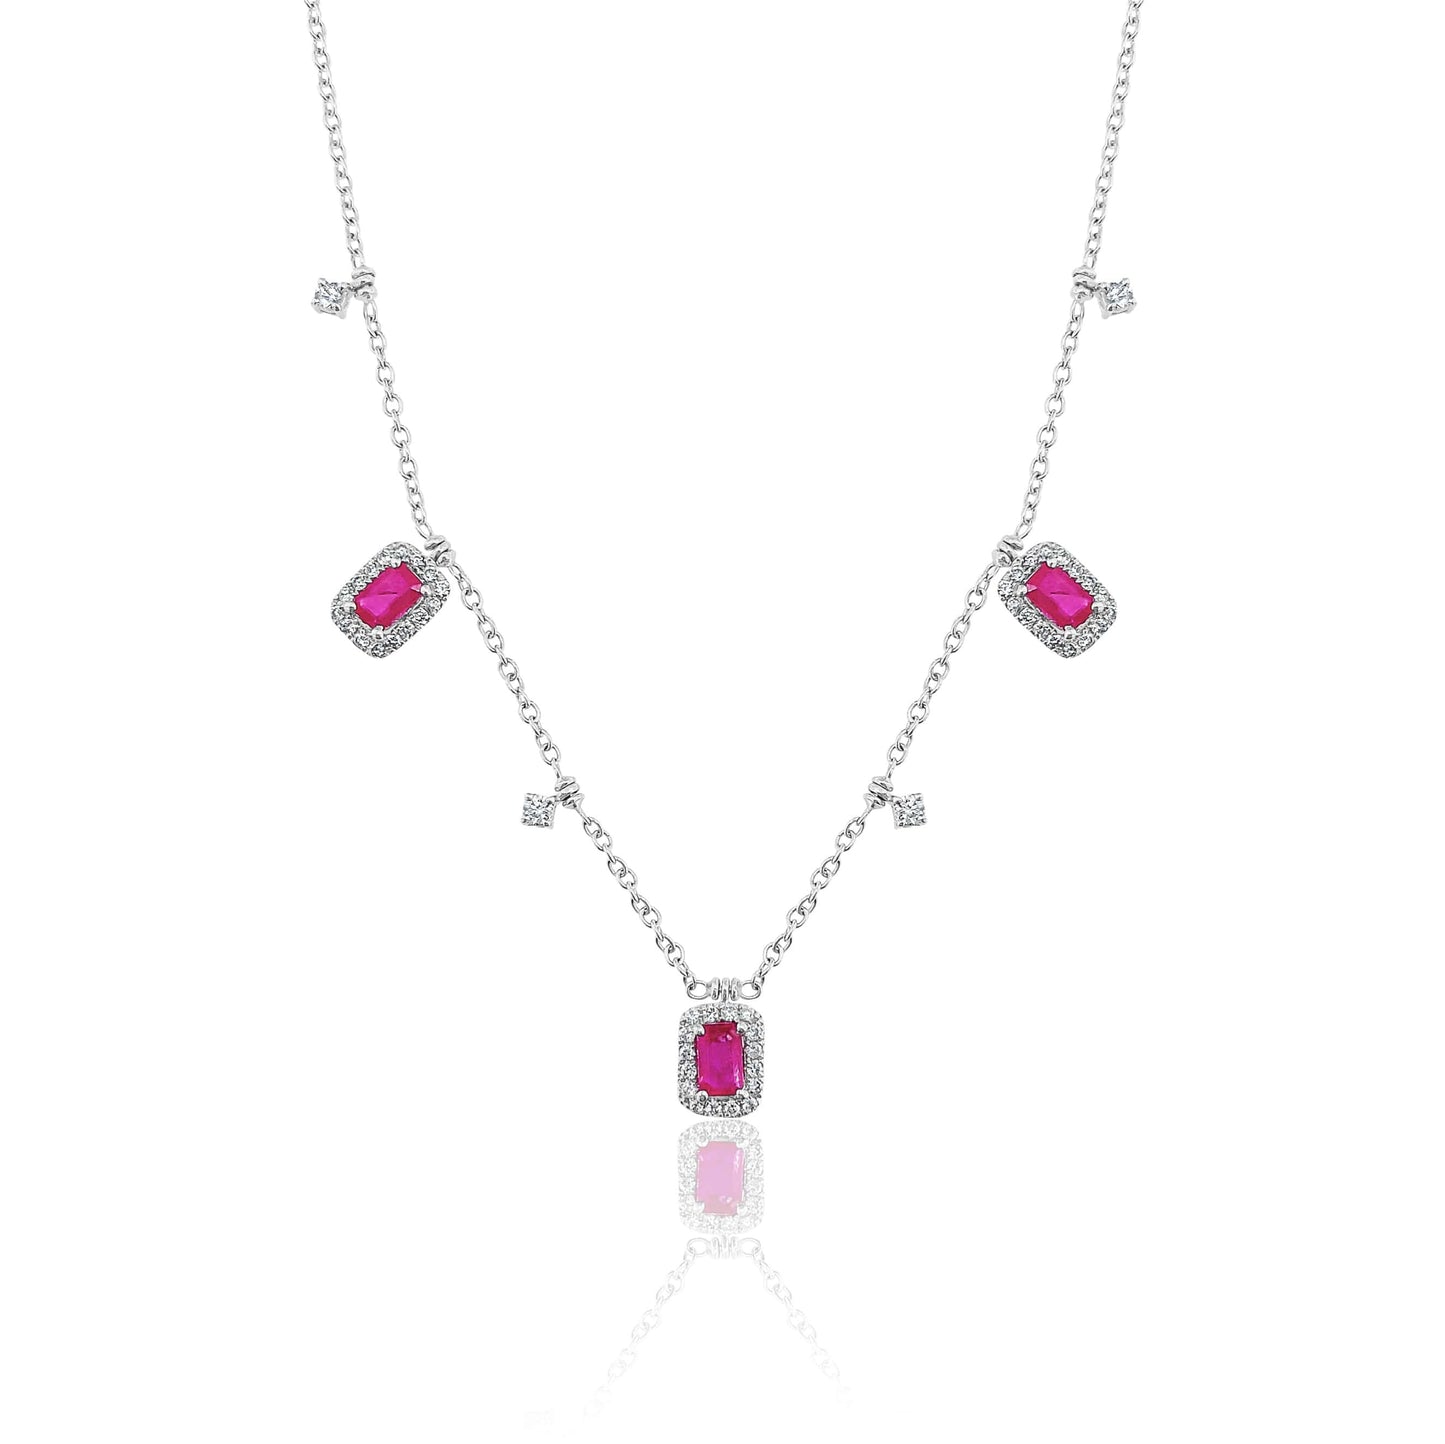 Dangling Ruby and Diamond Necklace